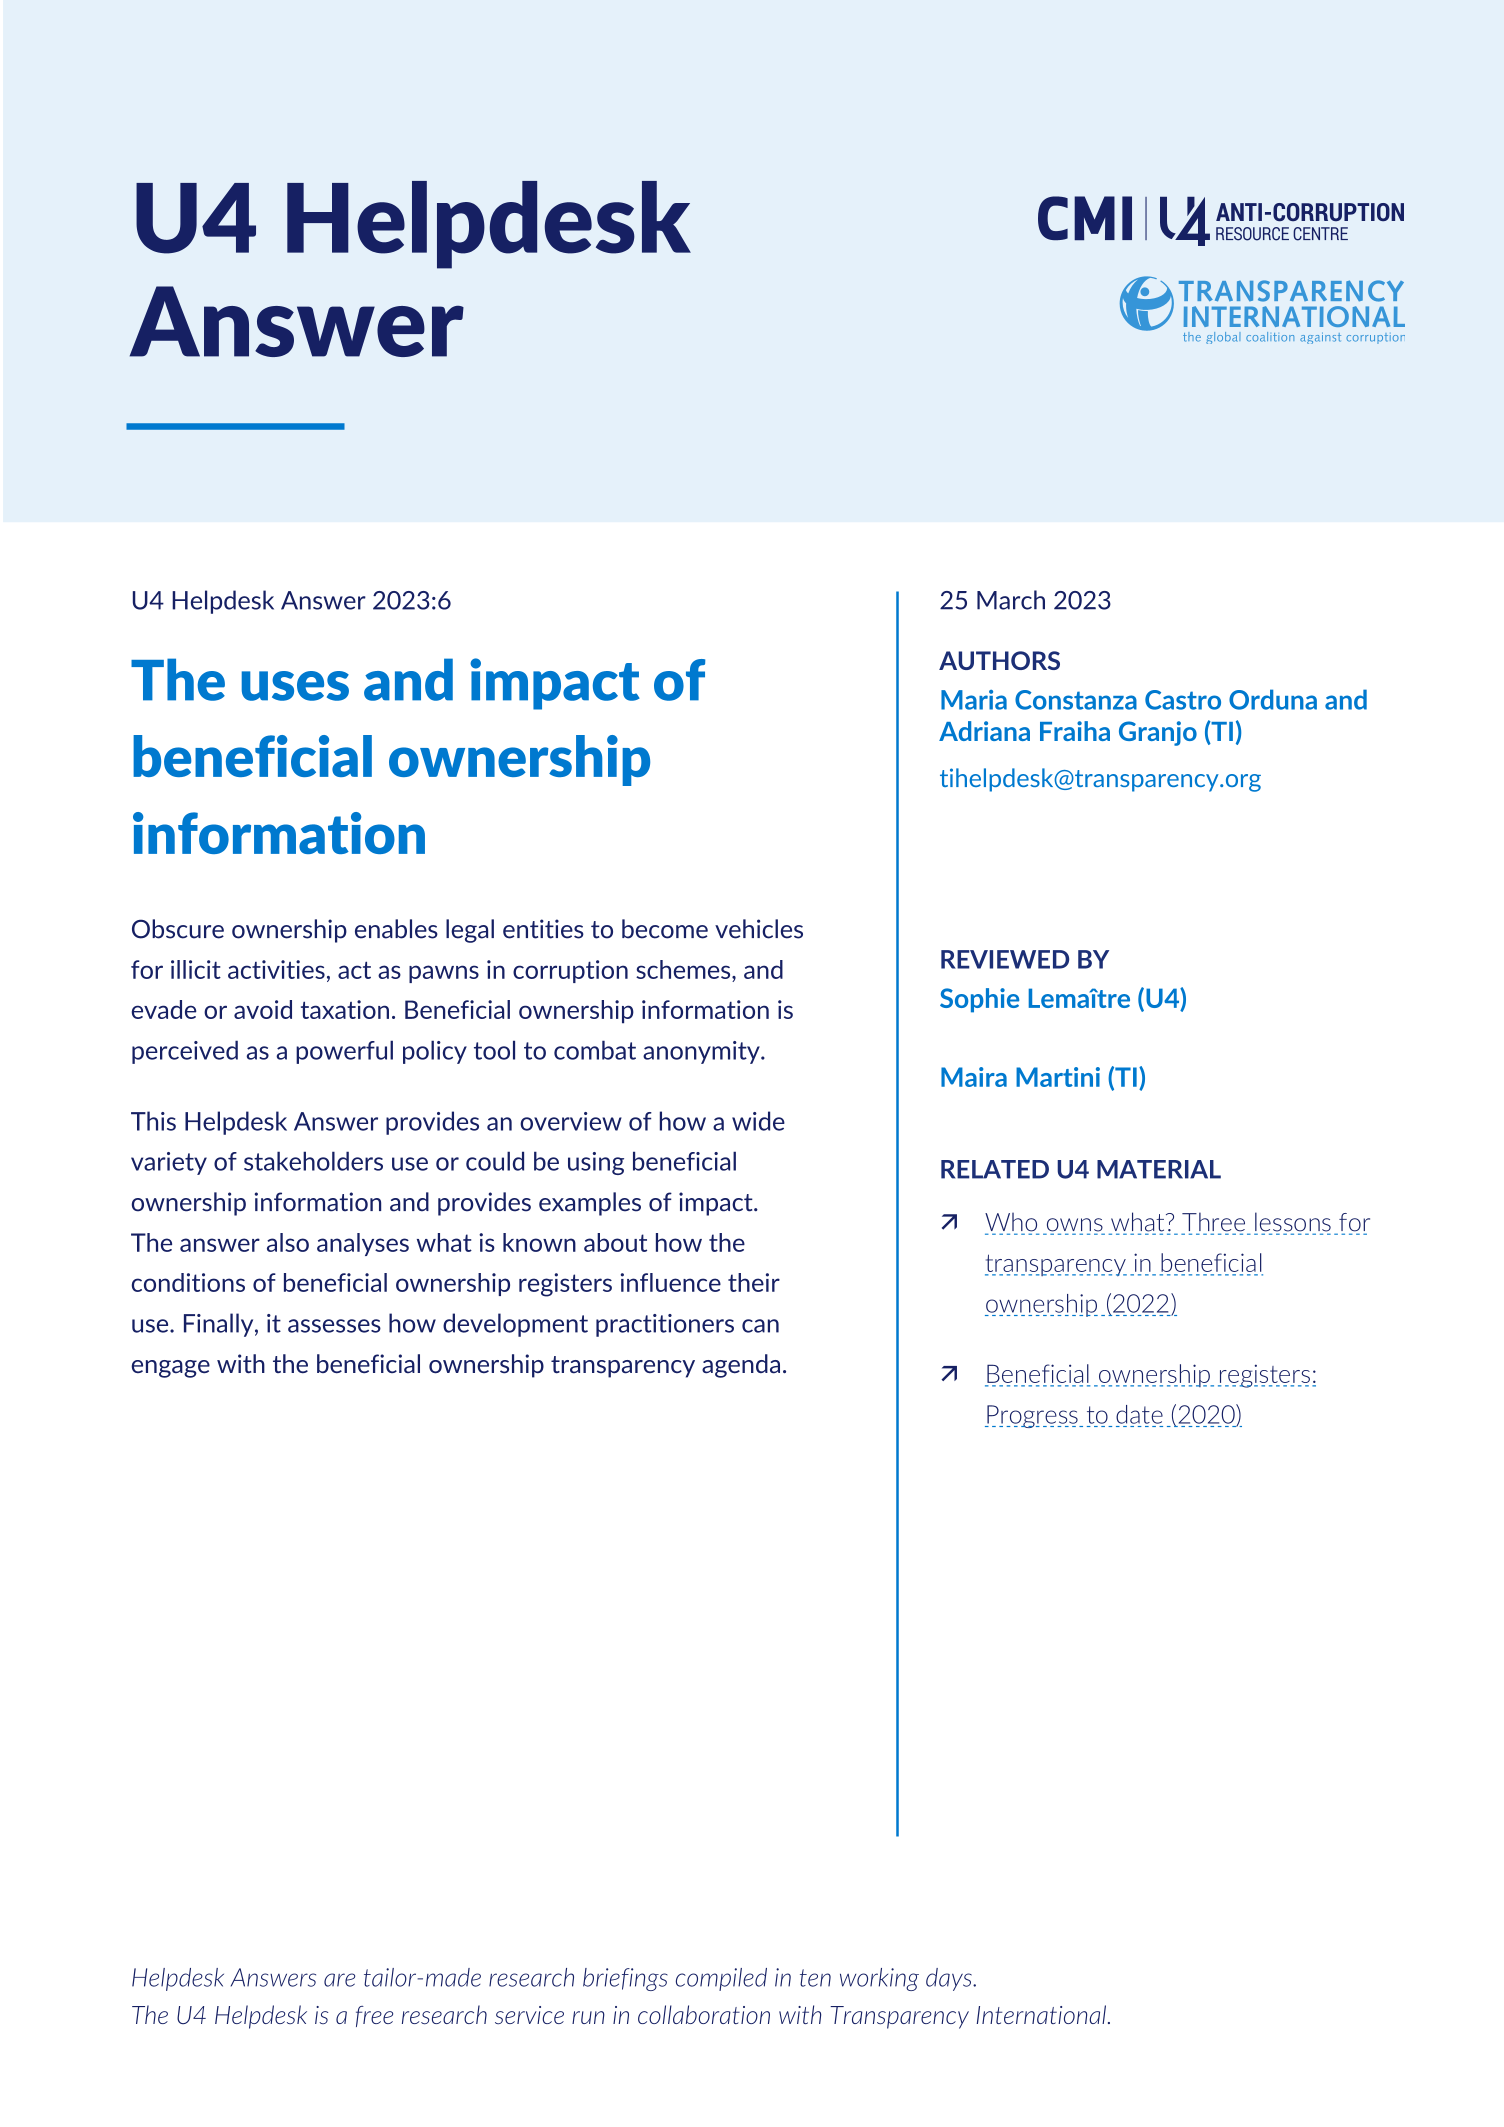 The uses and impact of beneficial ownership information